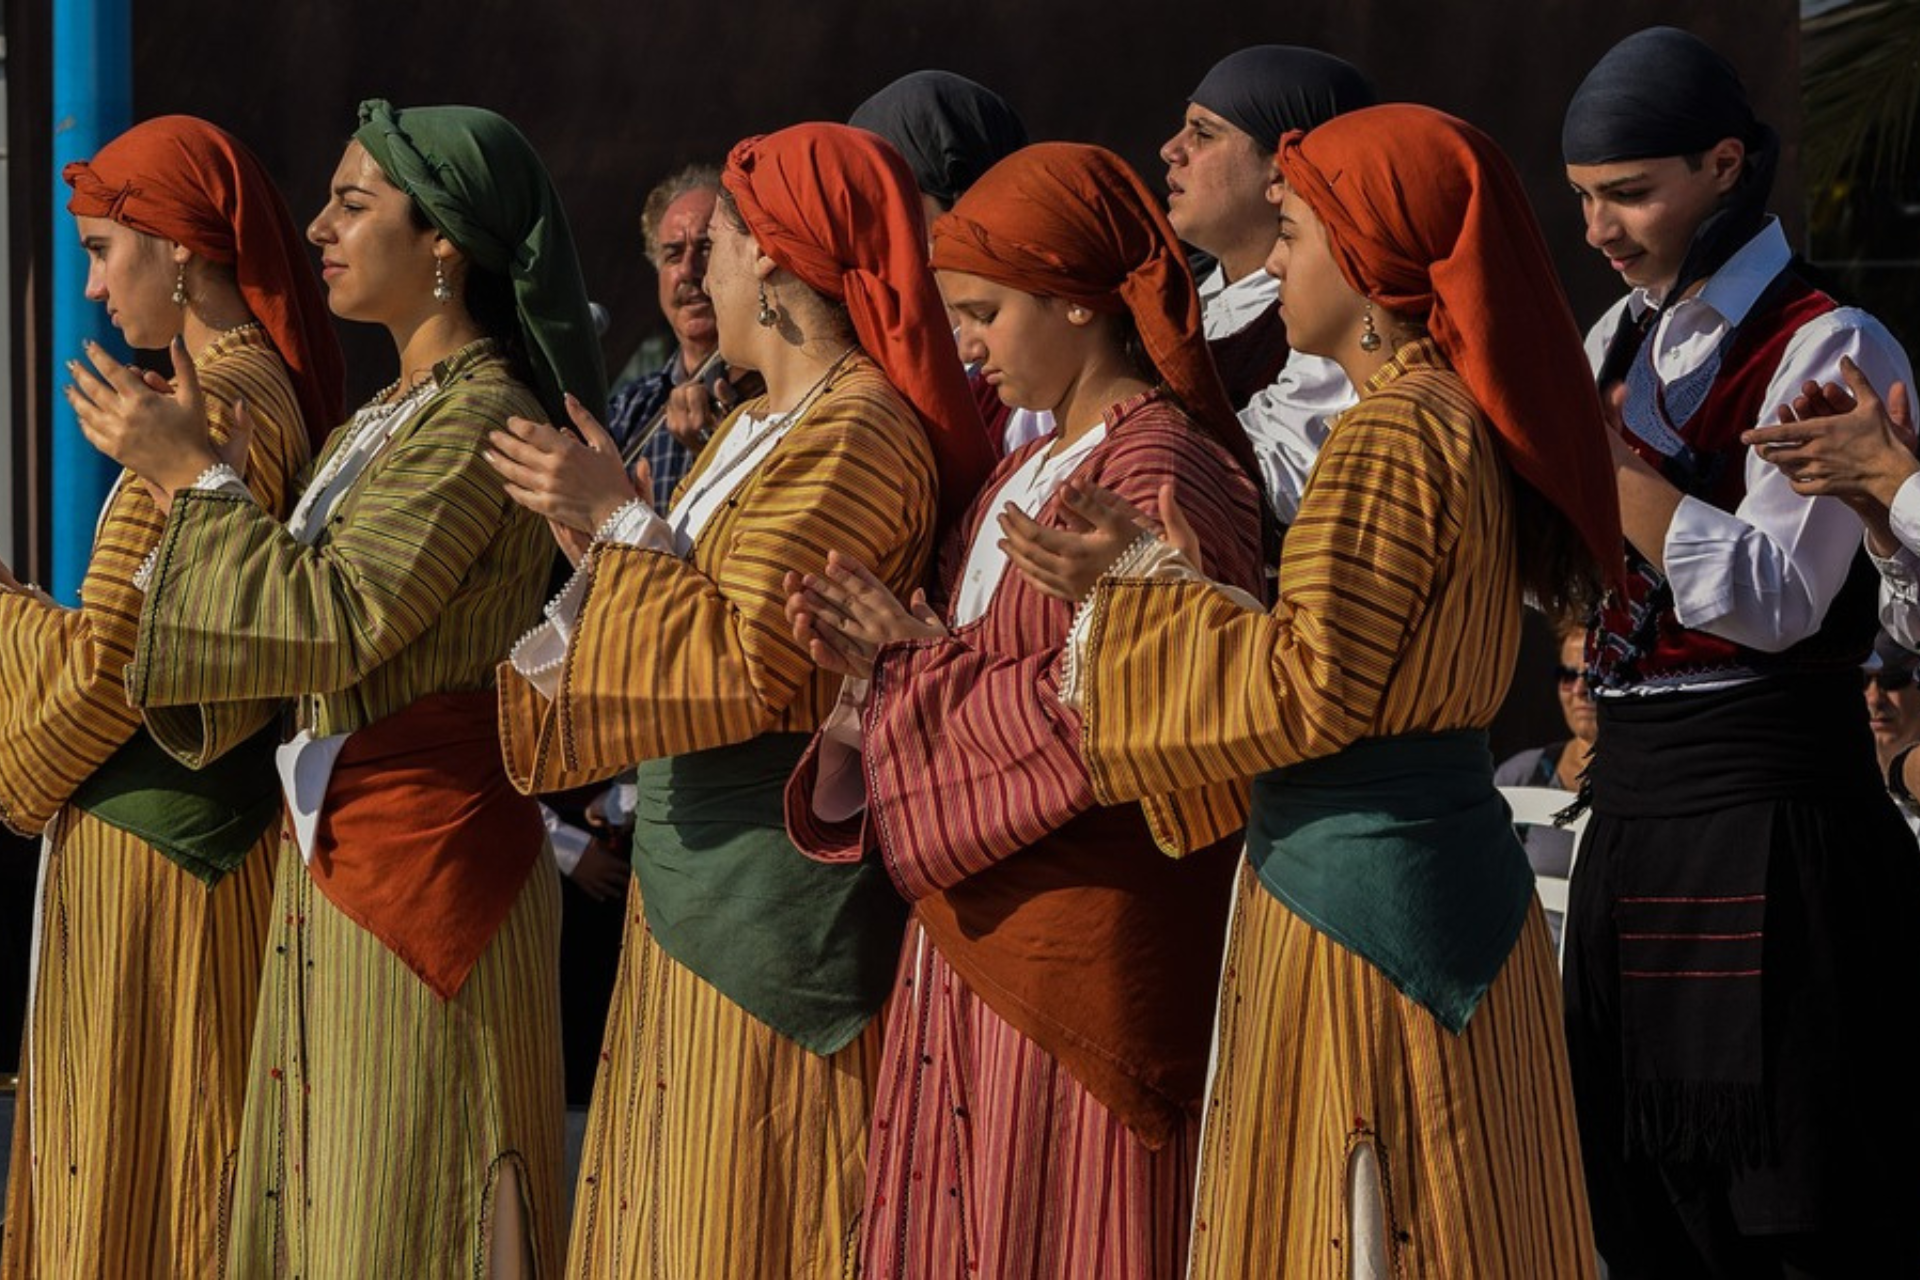 The Image of Greek People and Culture - A Group Of Folk Dancer.